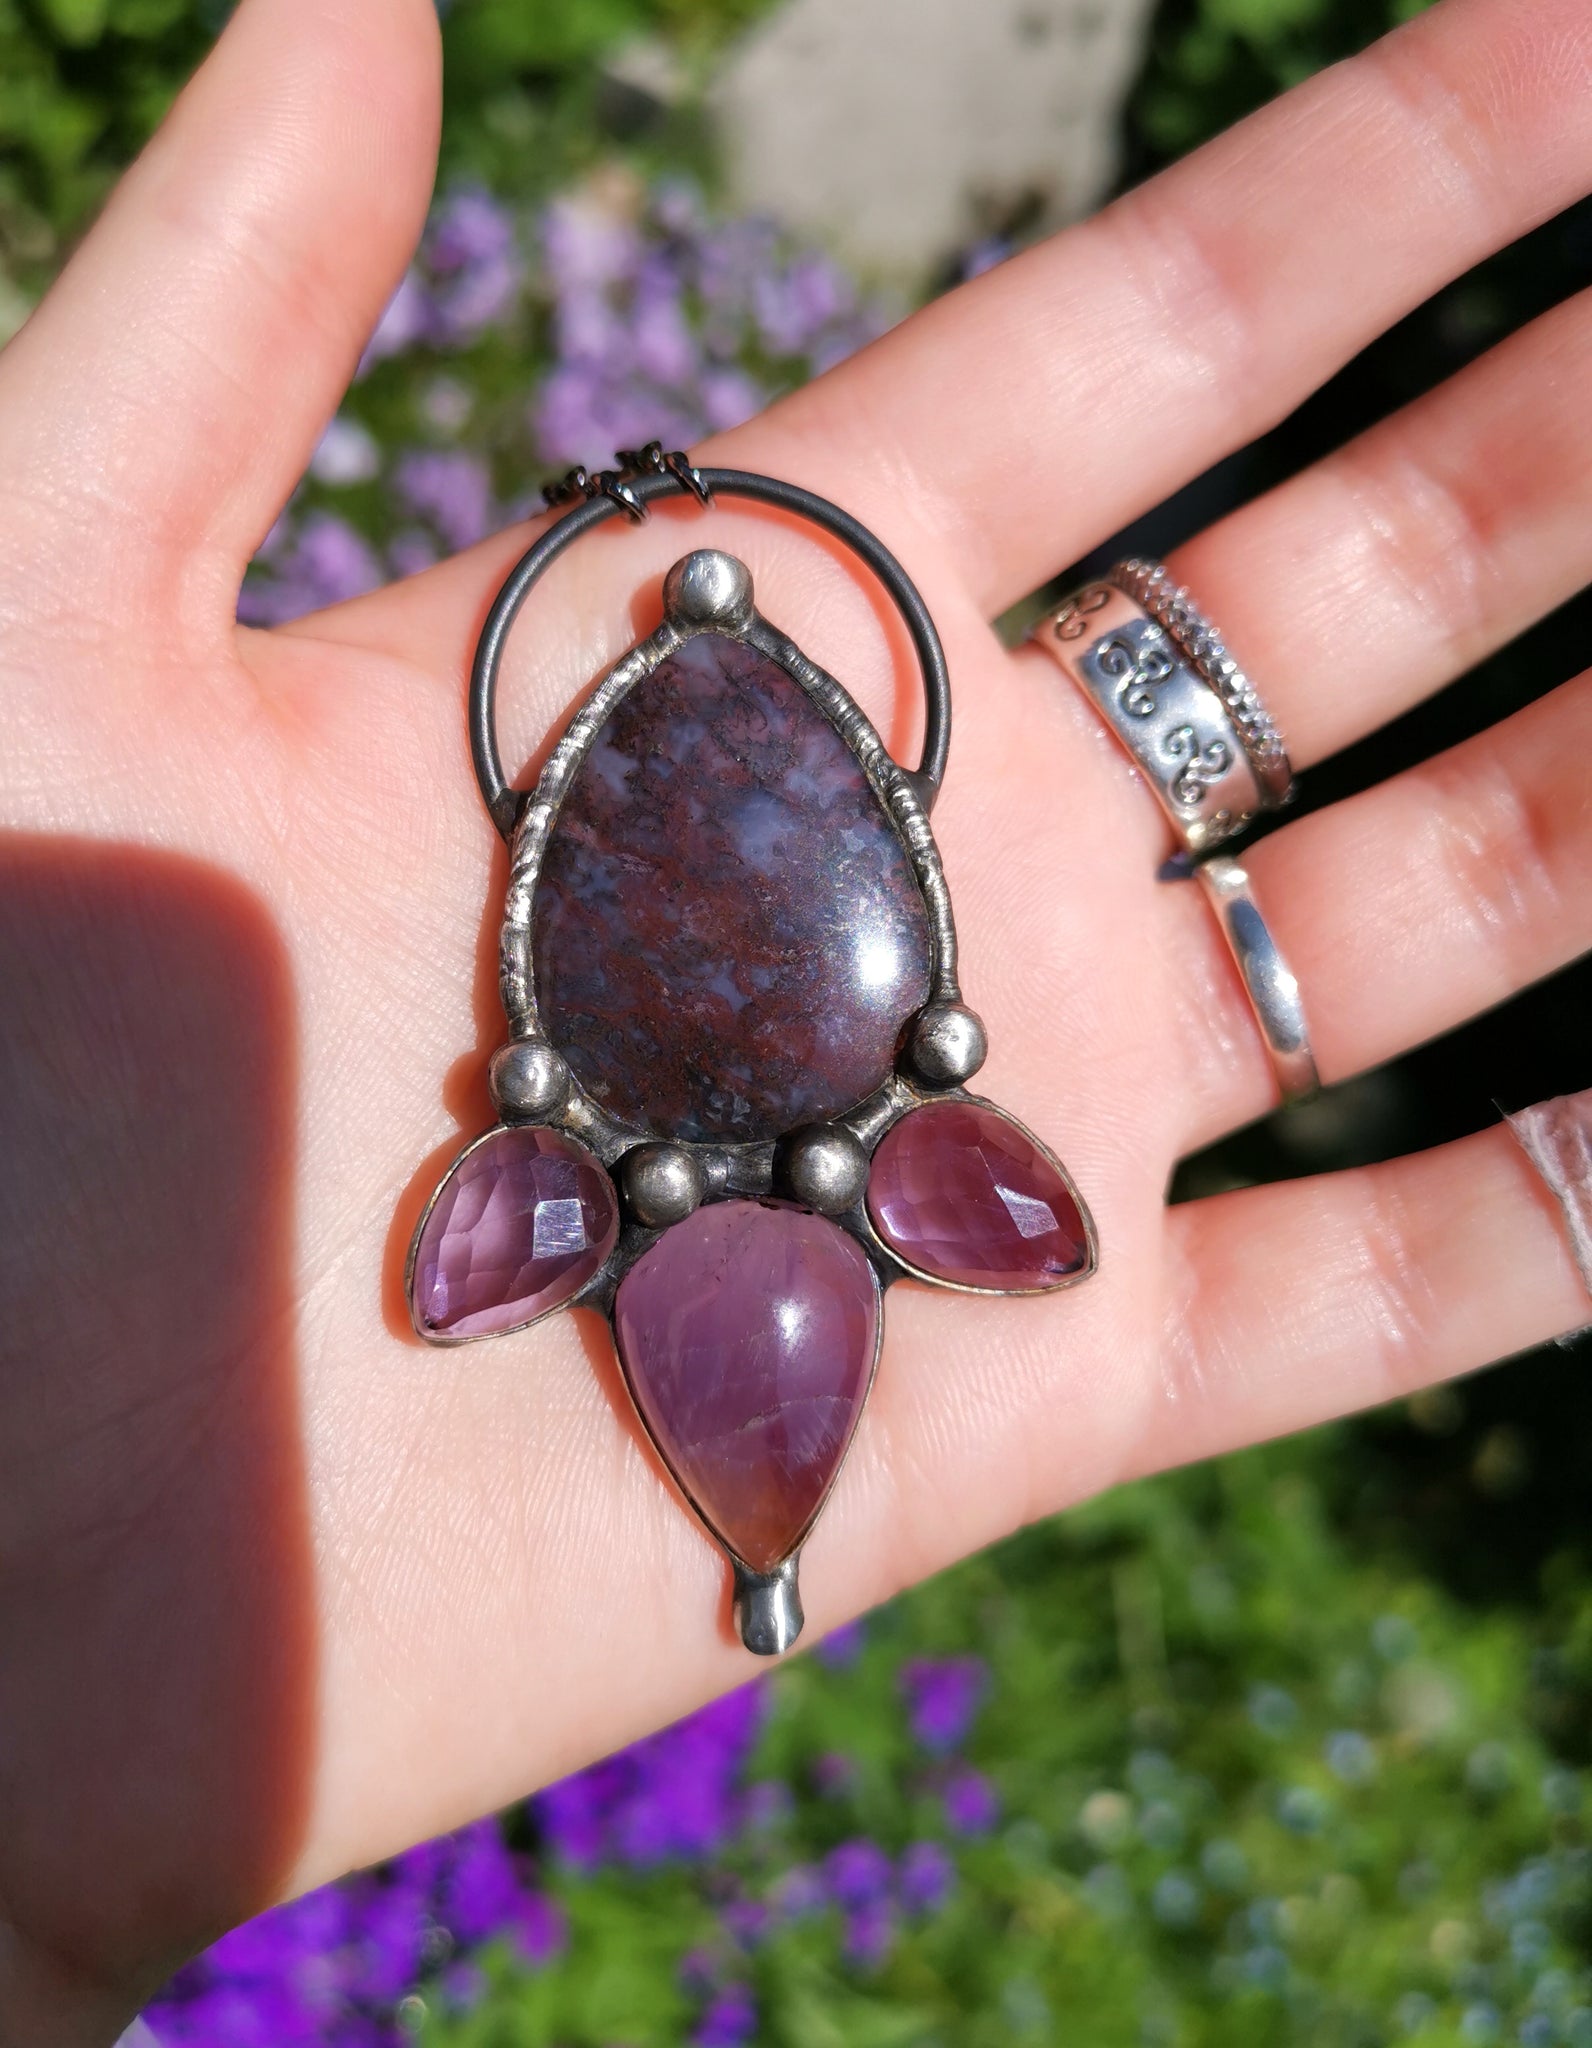 Red moss agate and amethyst pendant